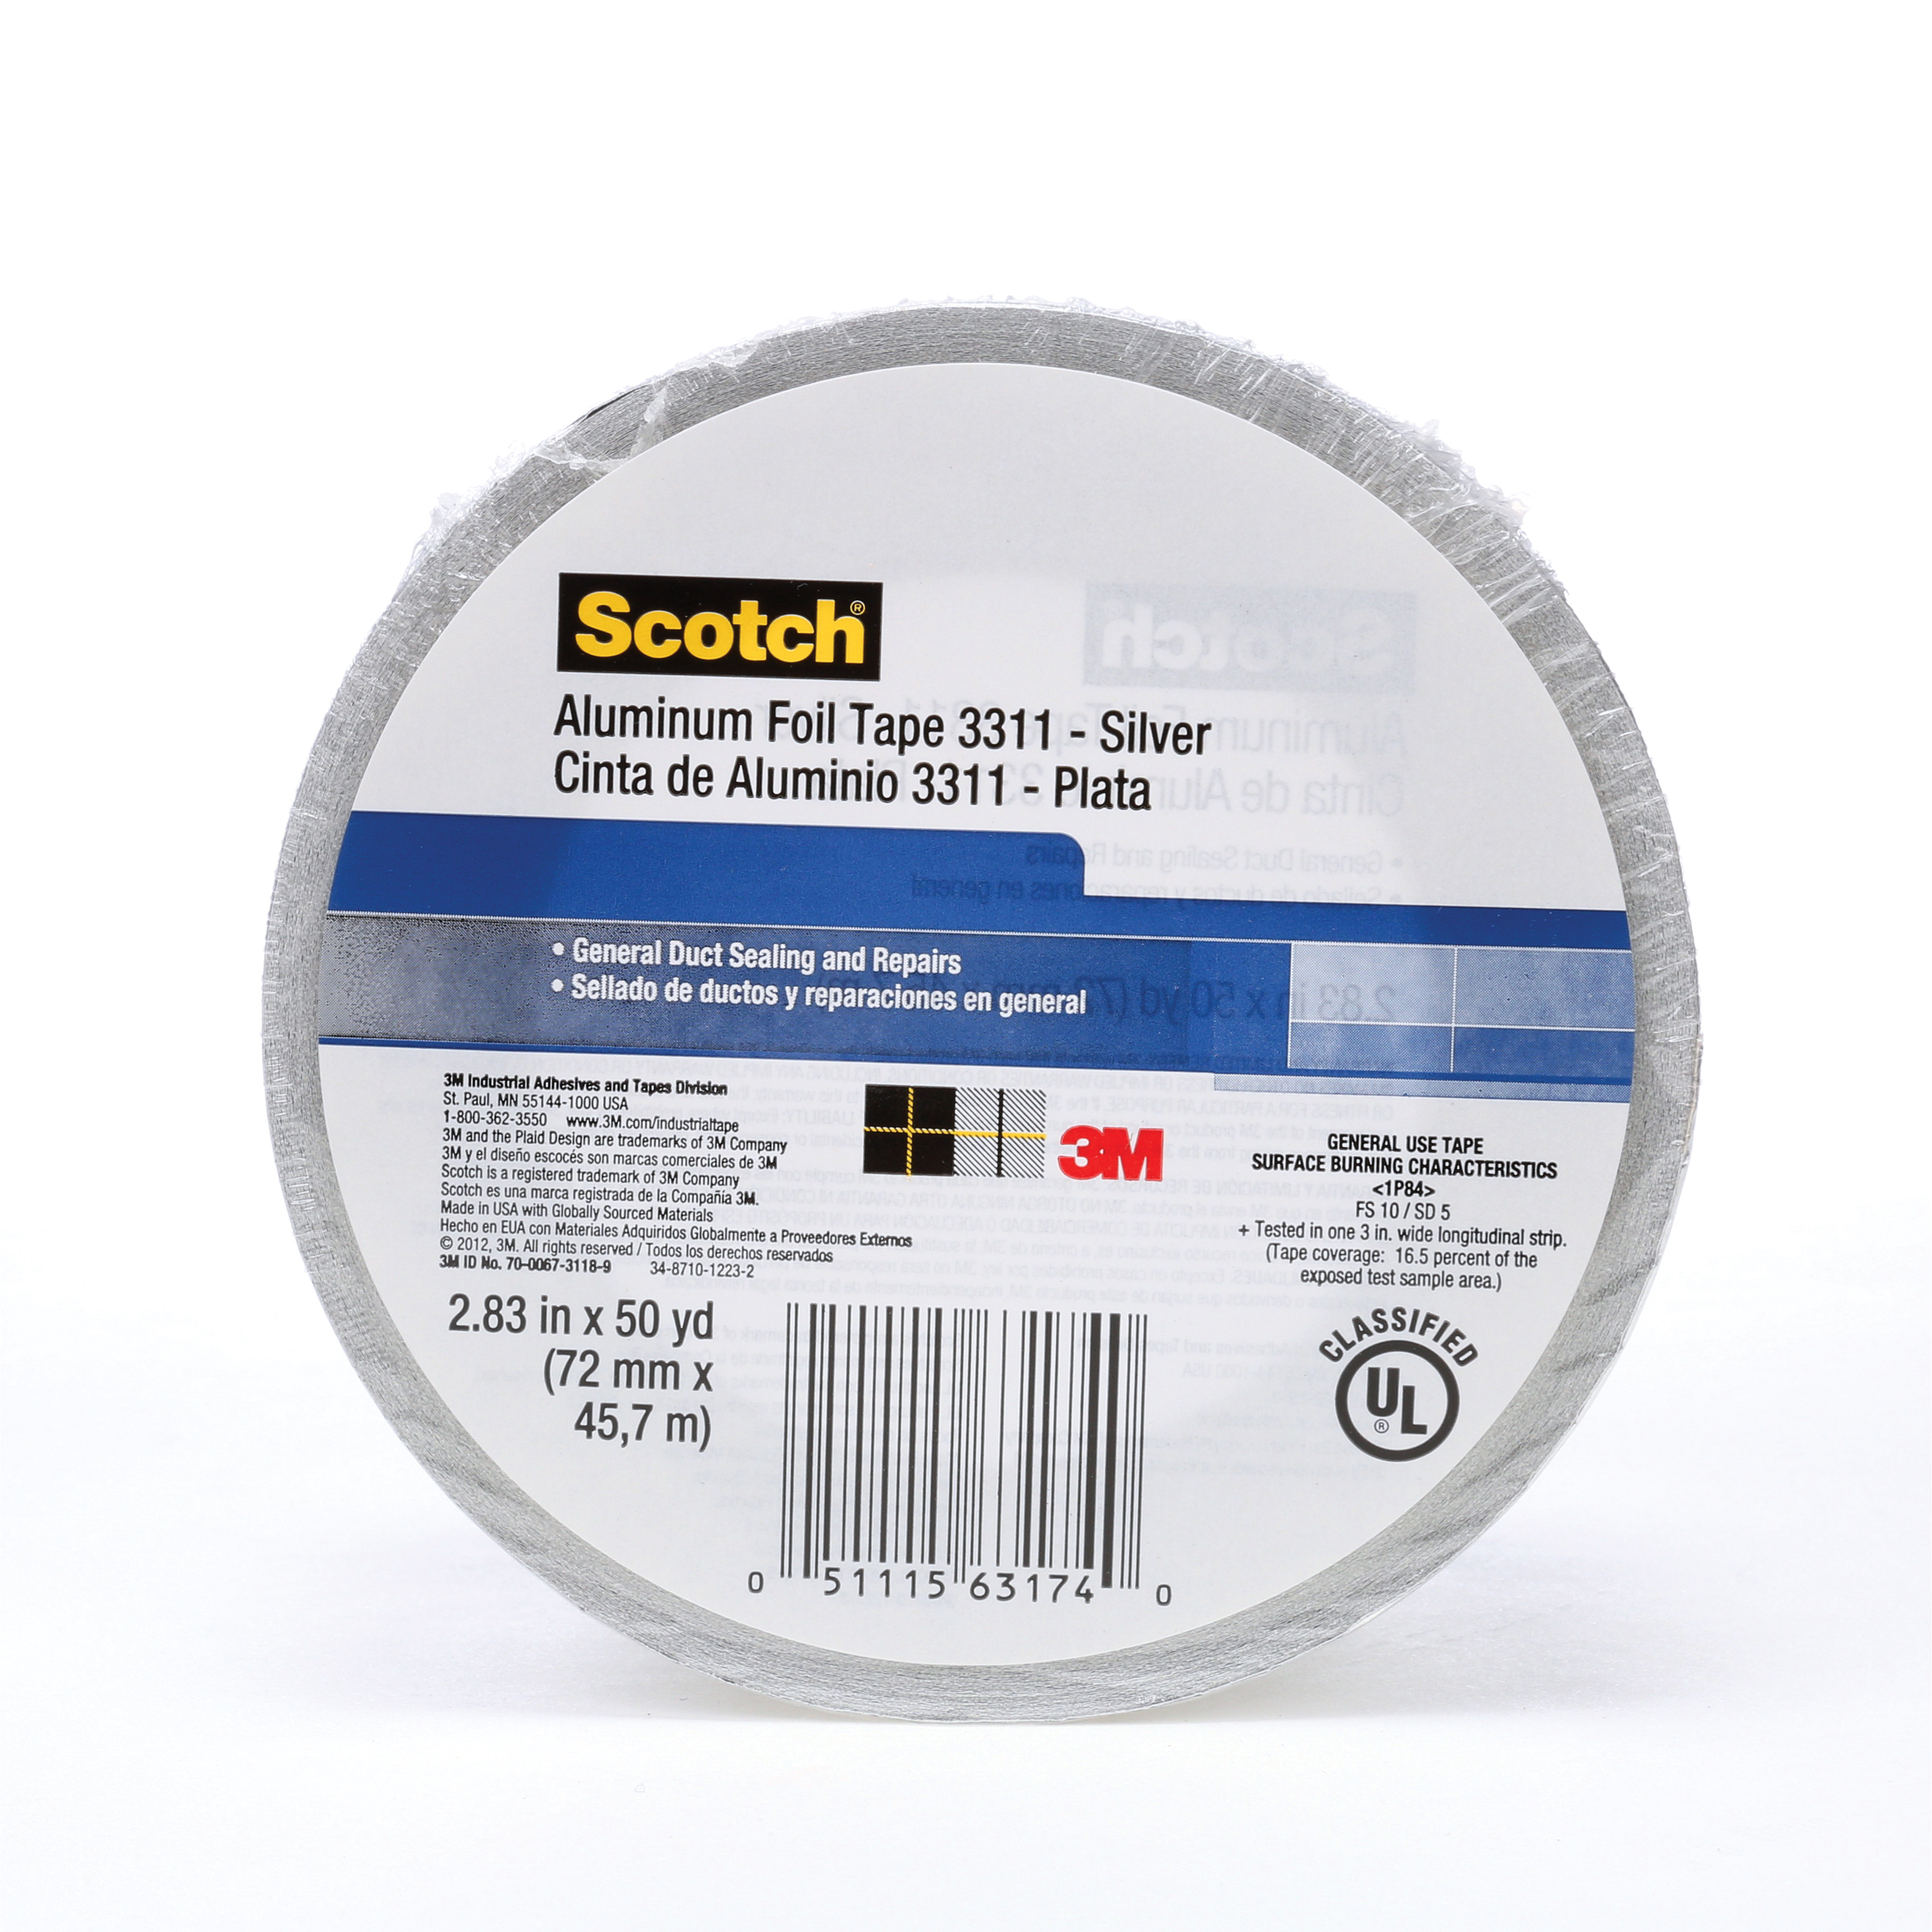 3M™ 021200-85484 Premium Performance Self-Wound Foil Tape, 60 yd L x 8 in W, 4.6 mil THK, Acrylic Adhesive, Aluminum Backing, Silver